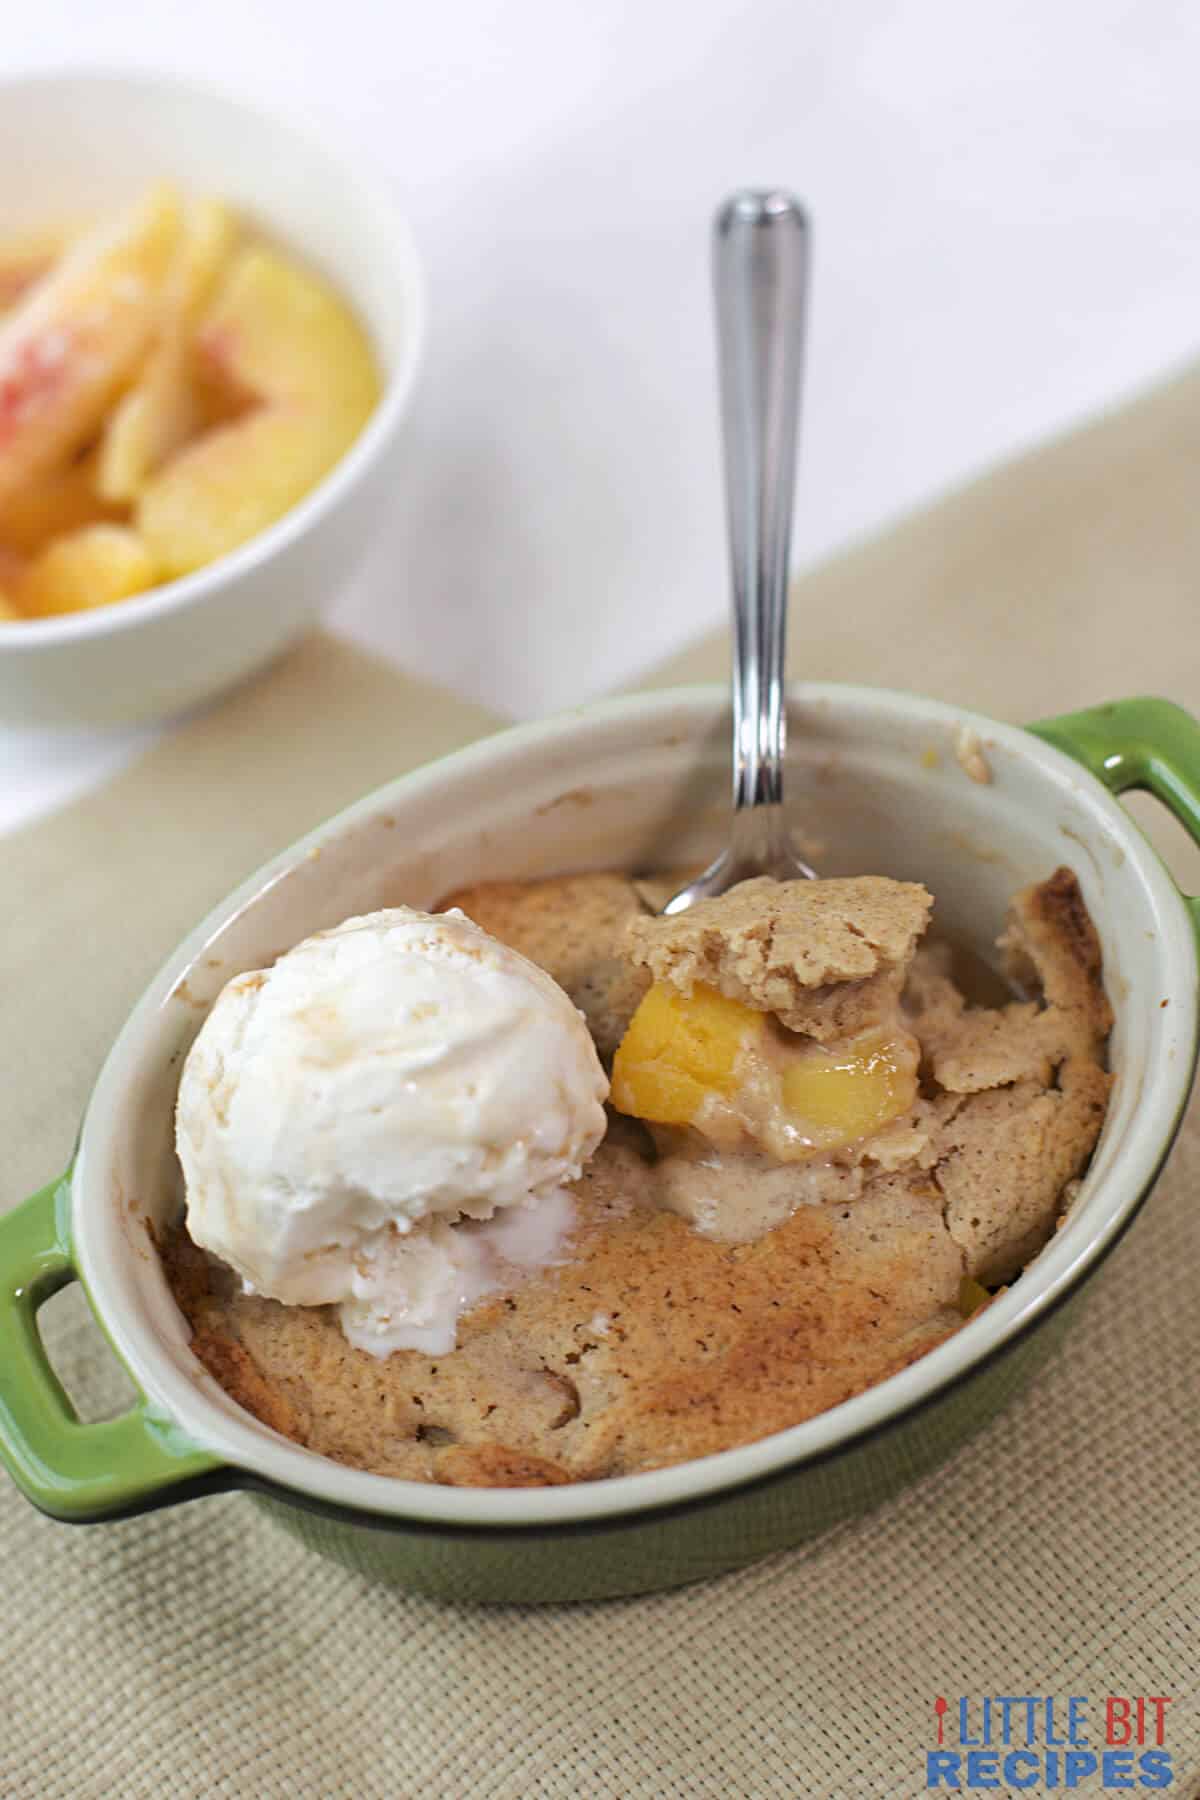 serving cobbler with ice cream on top.